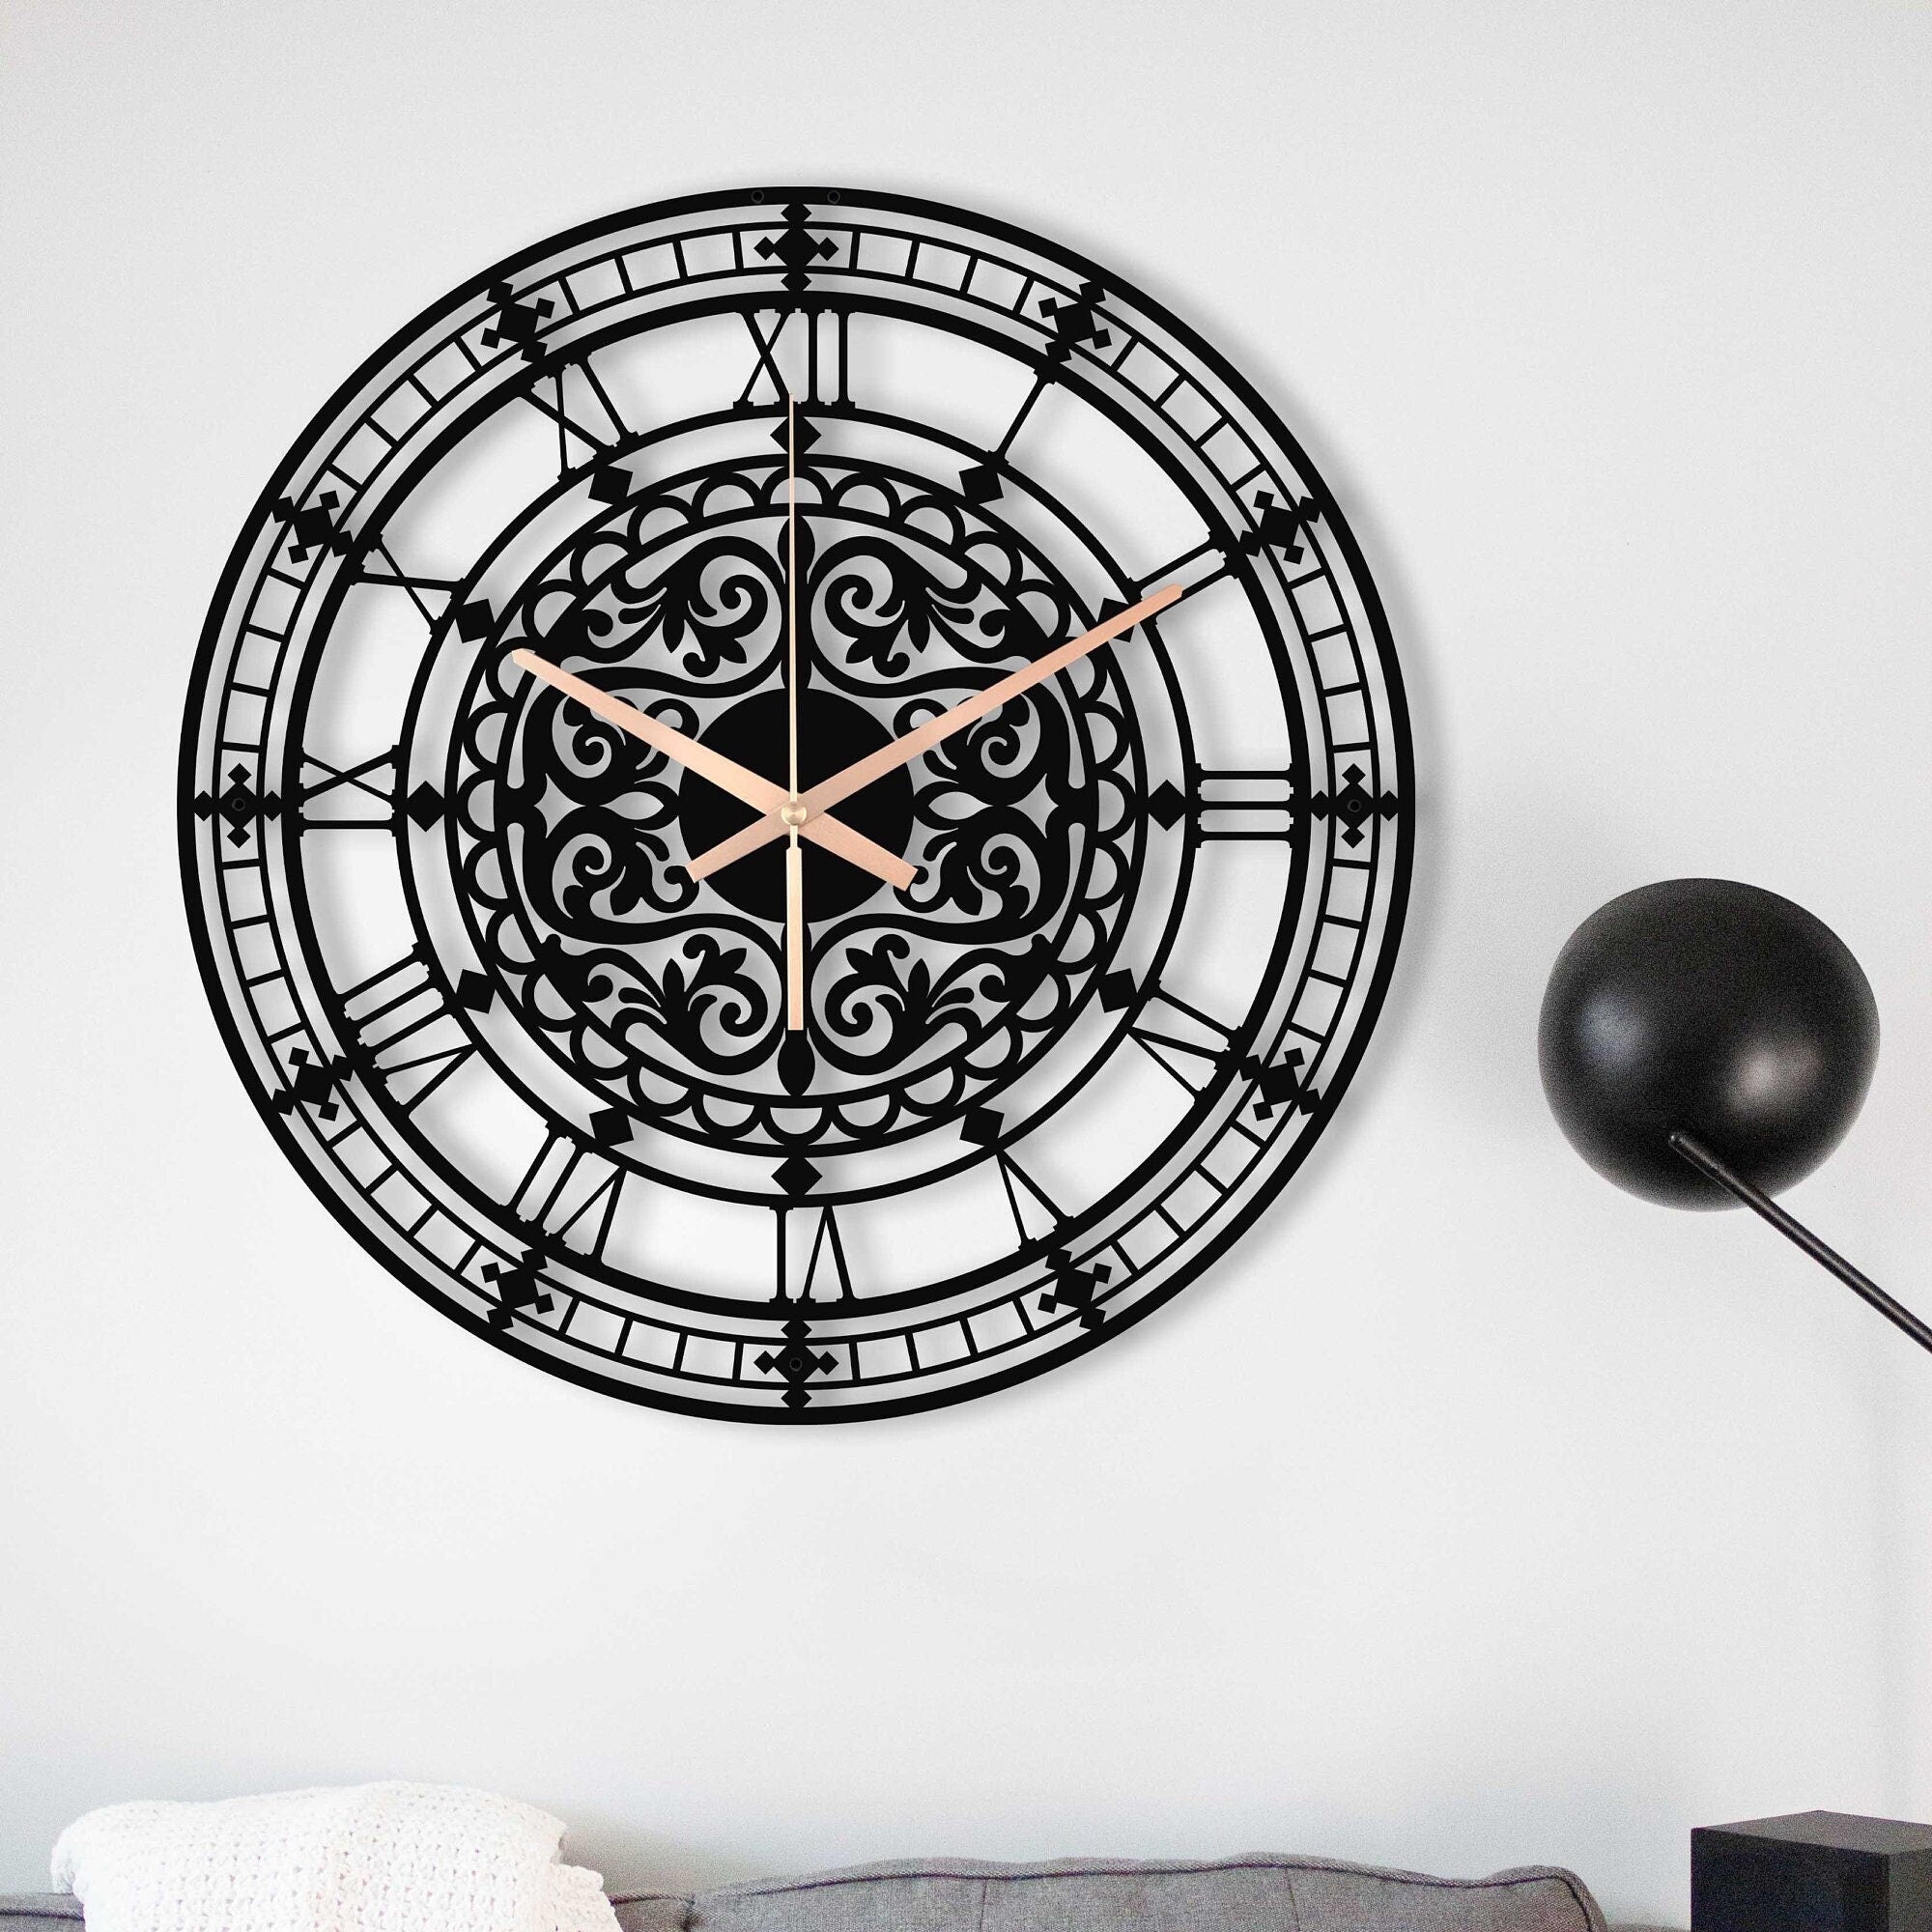 Metal Wall Clock, Mid Century Modern Wall Clock, Large Wall Clock, Home Decor Gifts, Unique Wall Clock, Silent Wall Clock, Clocks For Wall